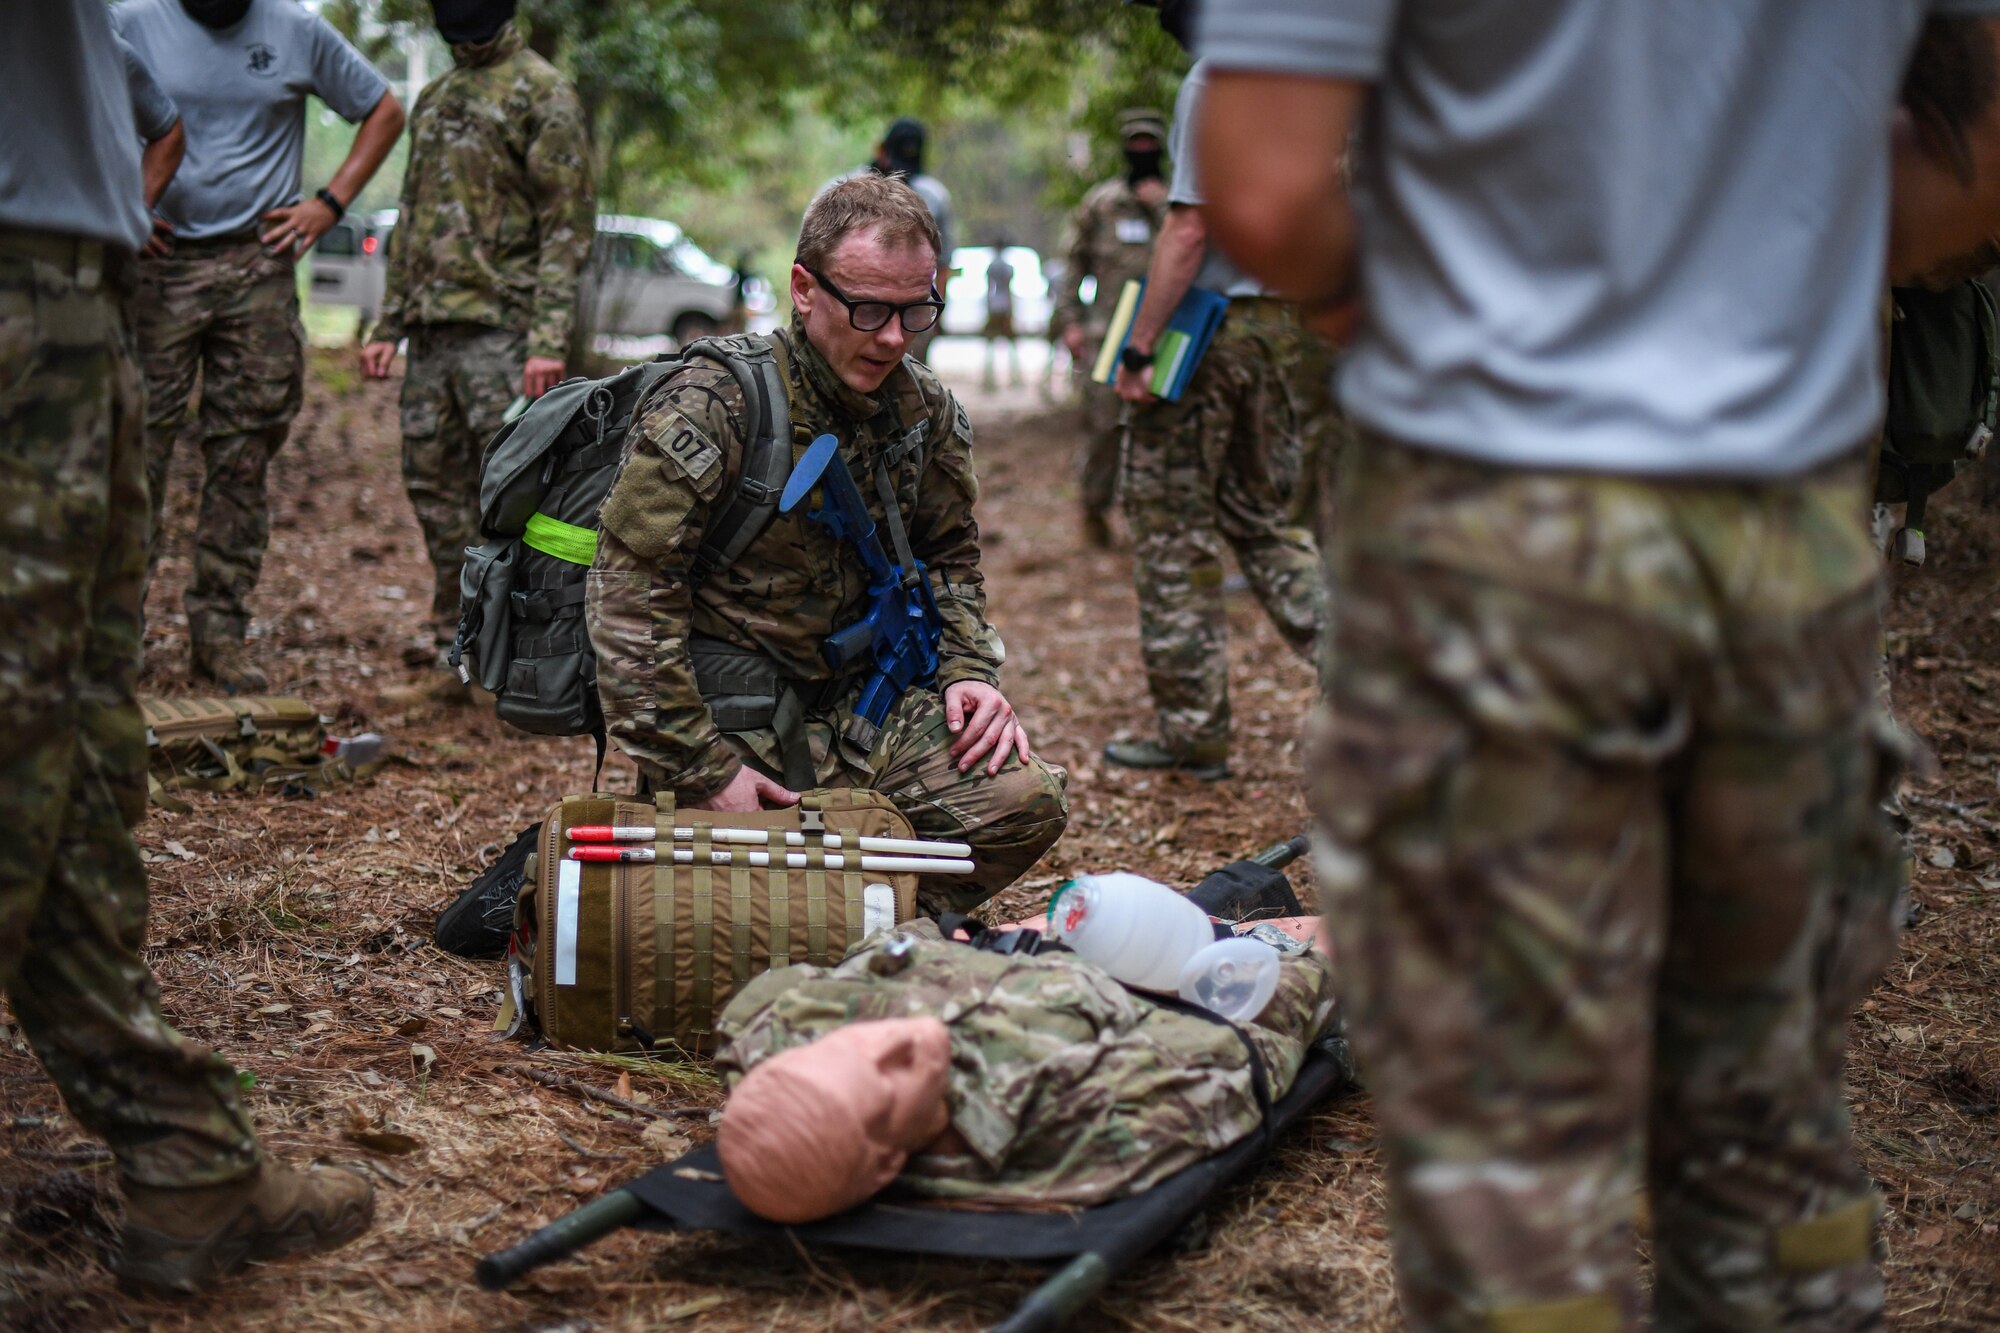 Special Operations Surgical Team candidates participate in a medical scenario providing emergency medical assistance to a subject on the leaf-covered ground in a woods